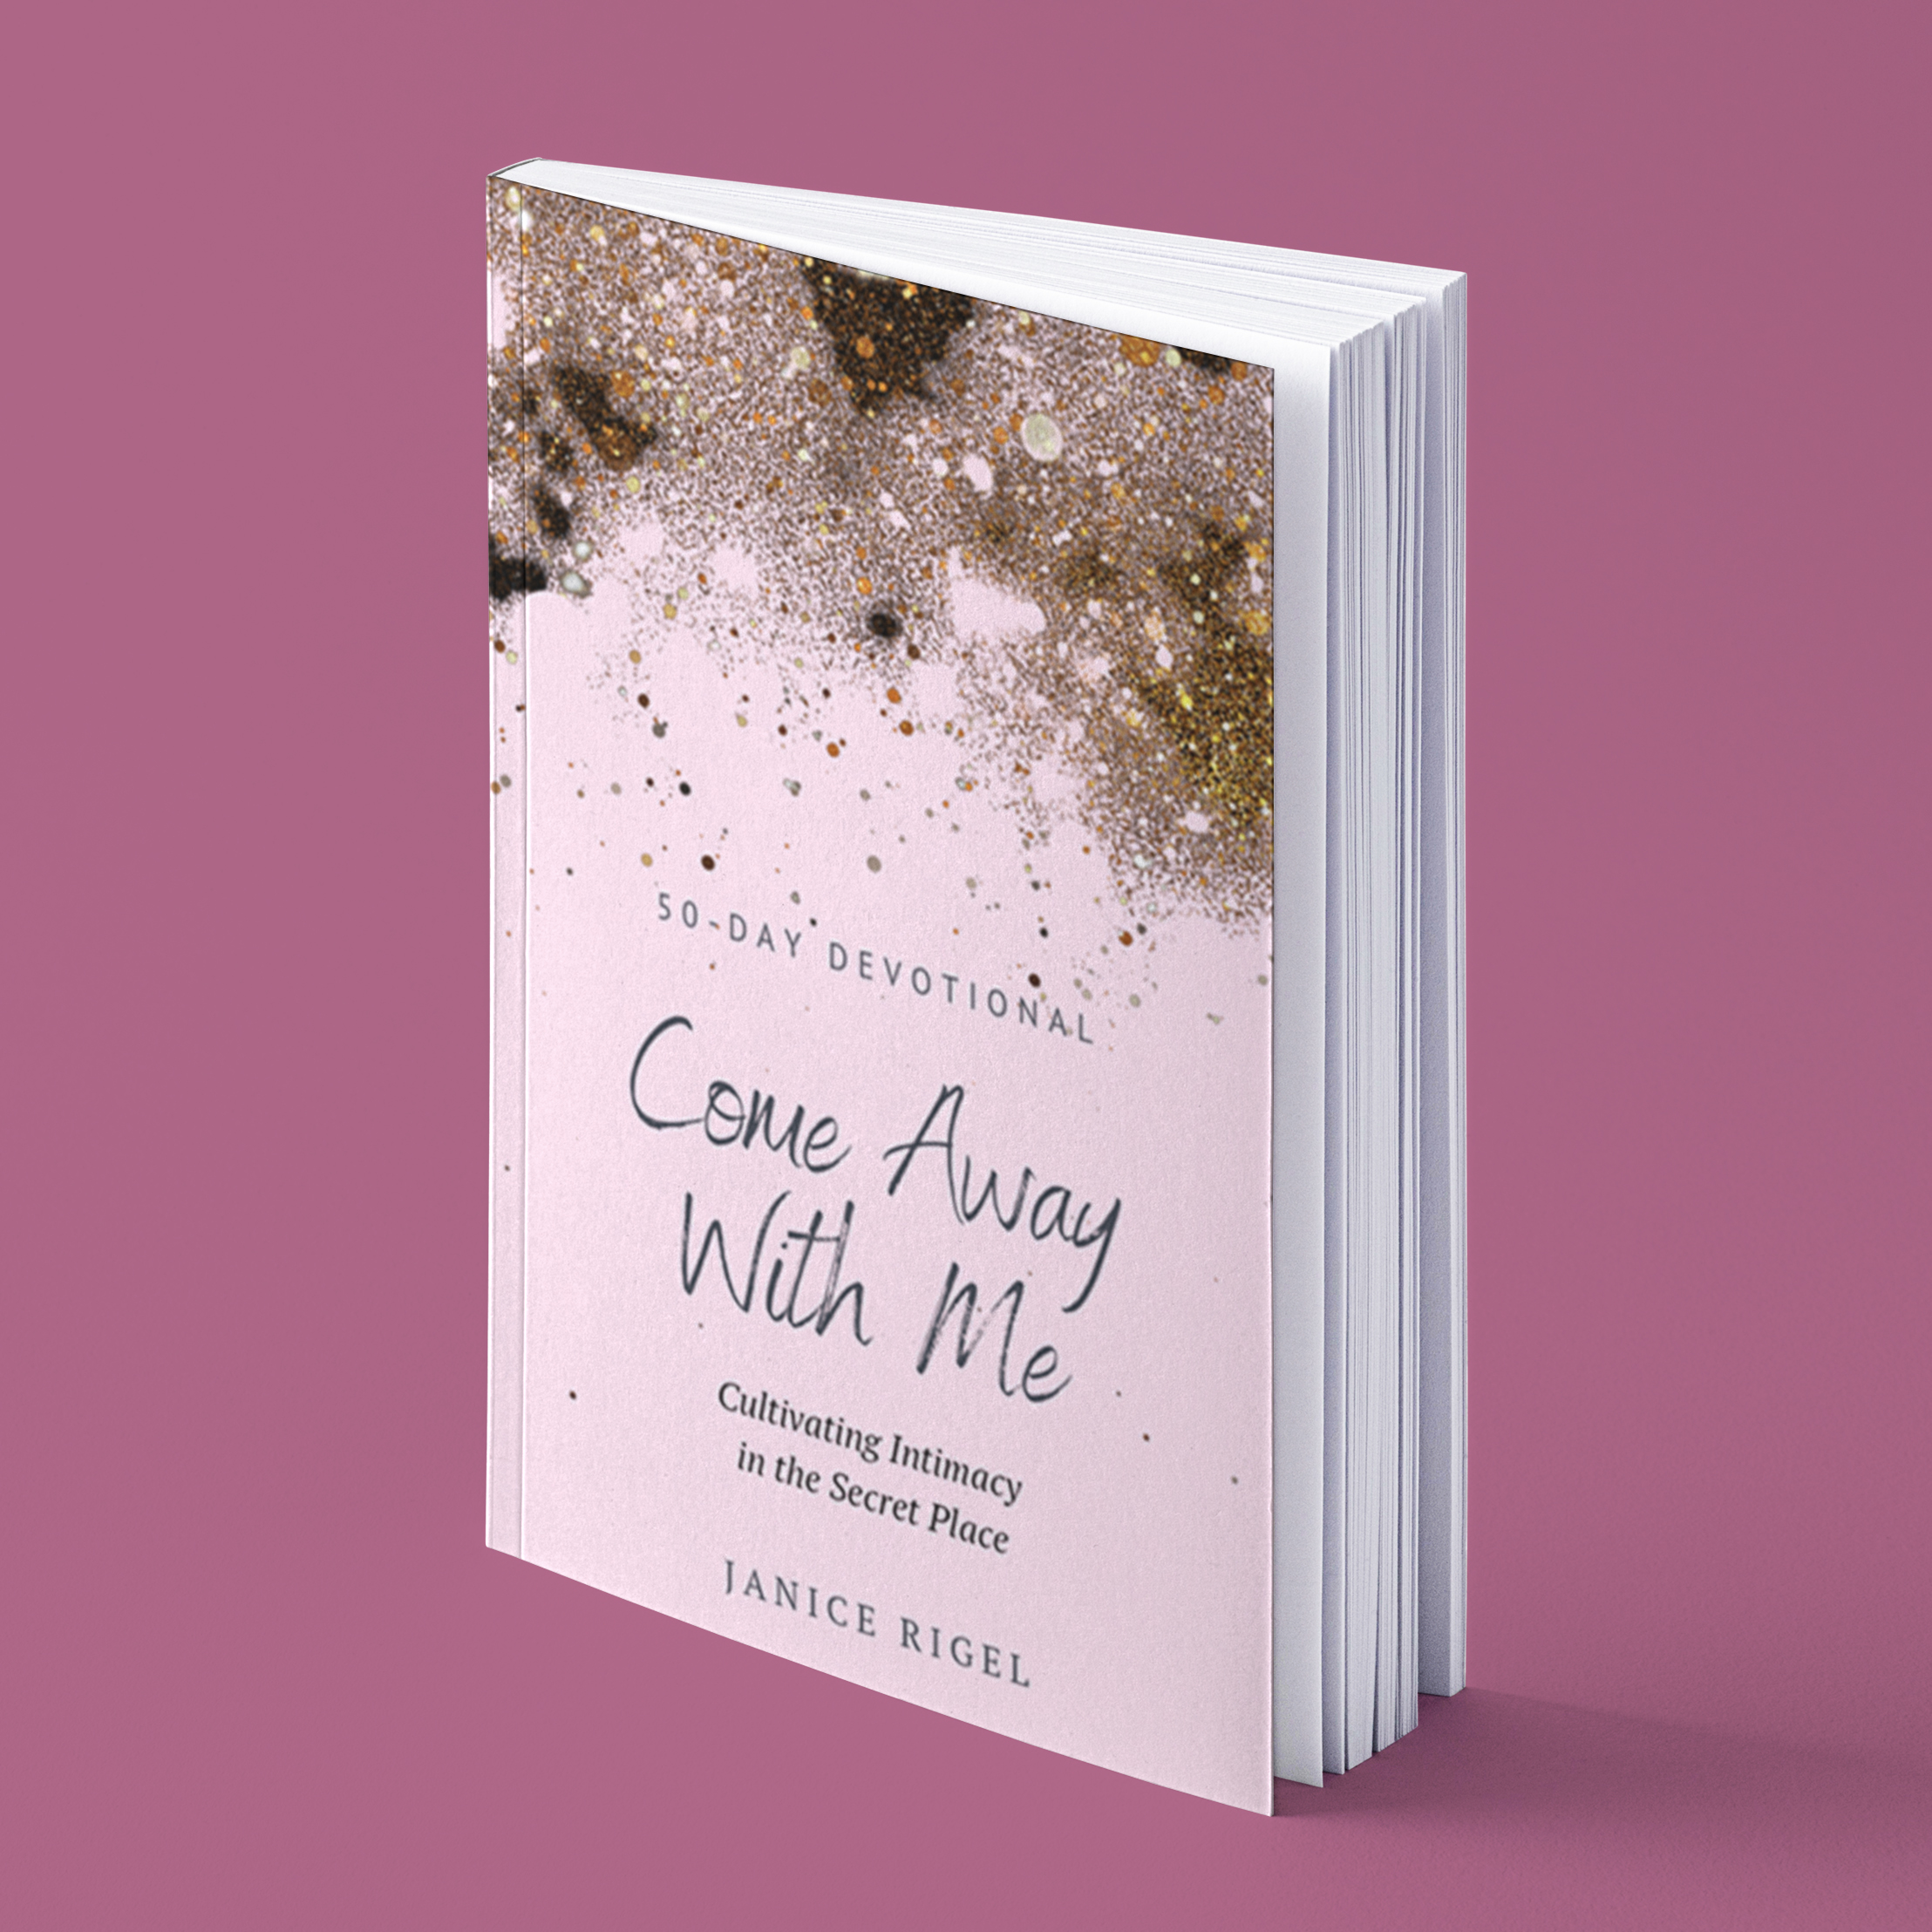 Come Away with Me: Cultivating Intimacy in the Secret Place. Written by Janice Rigel